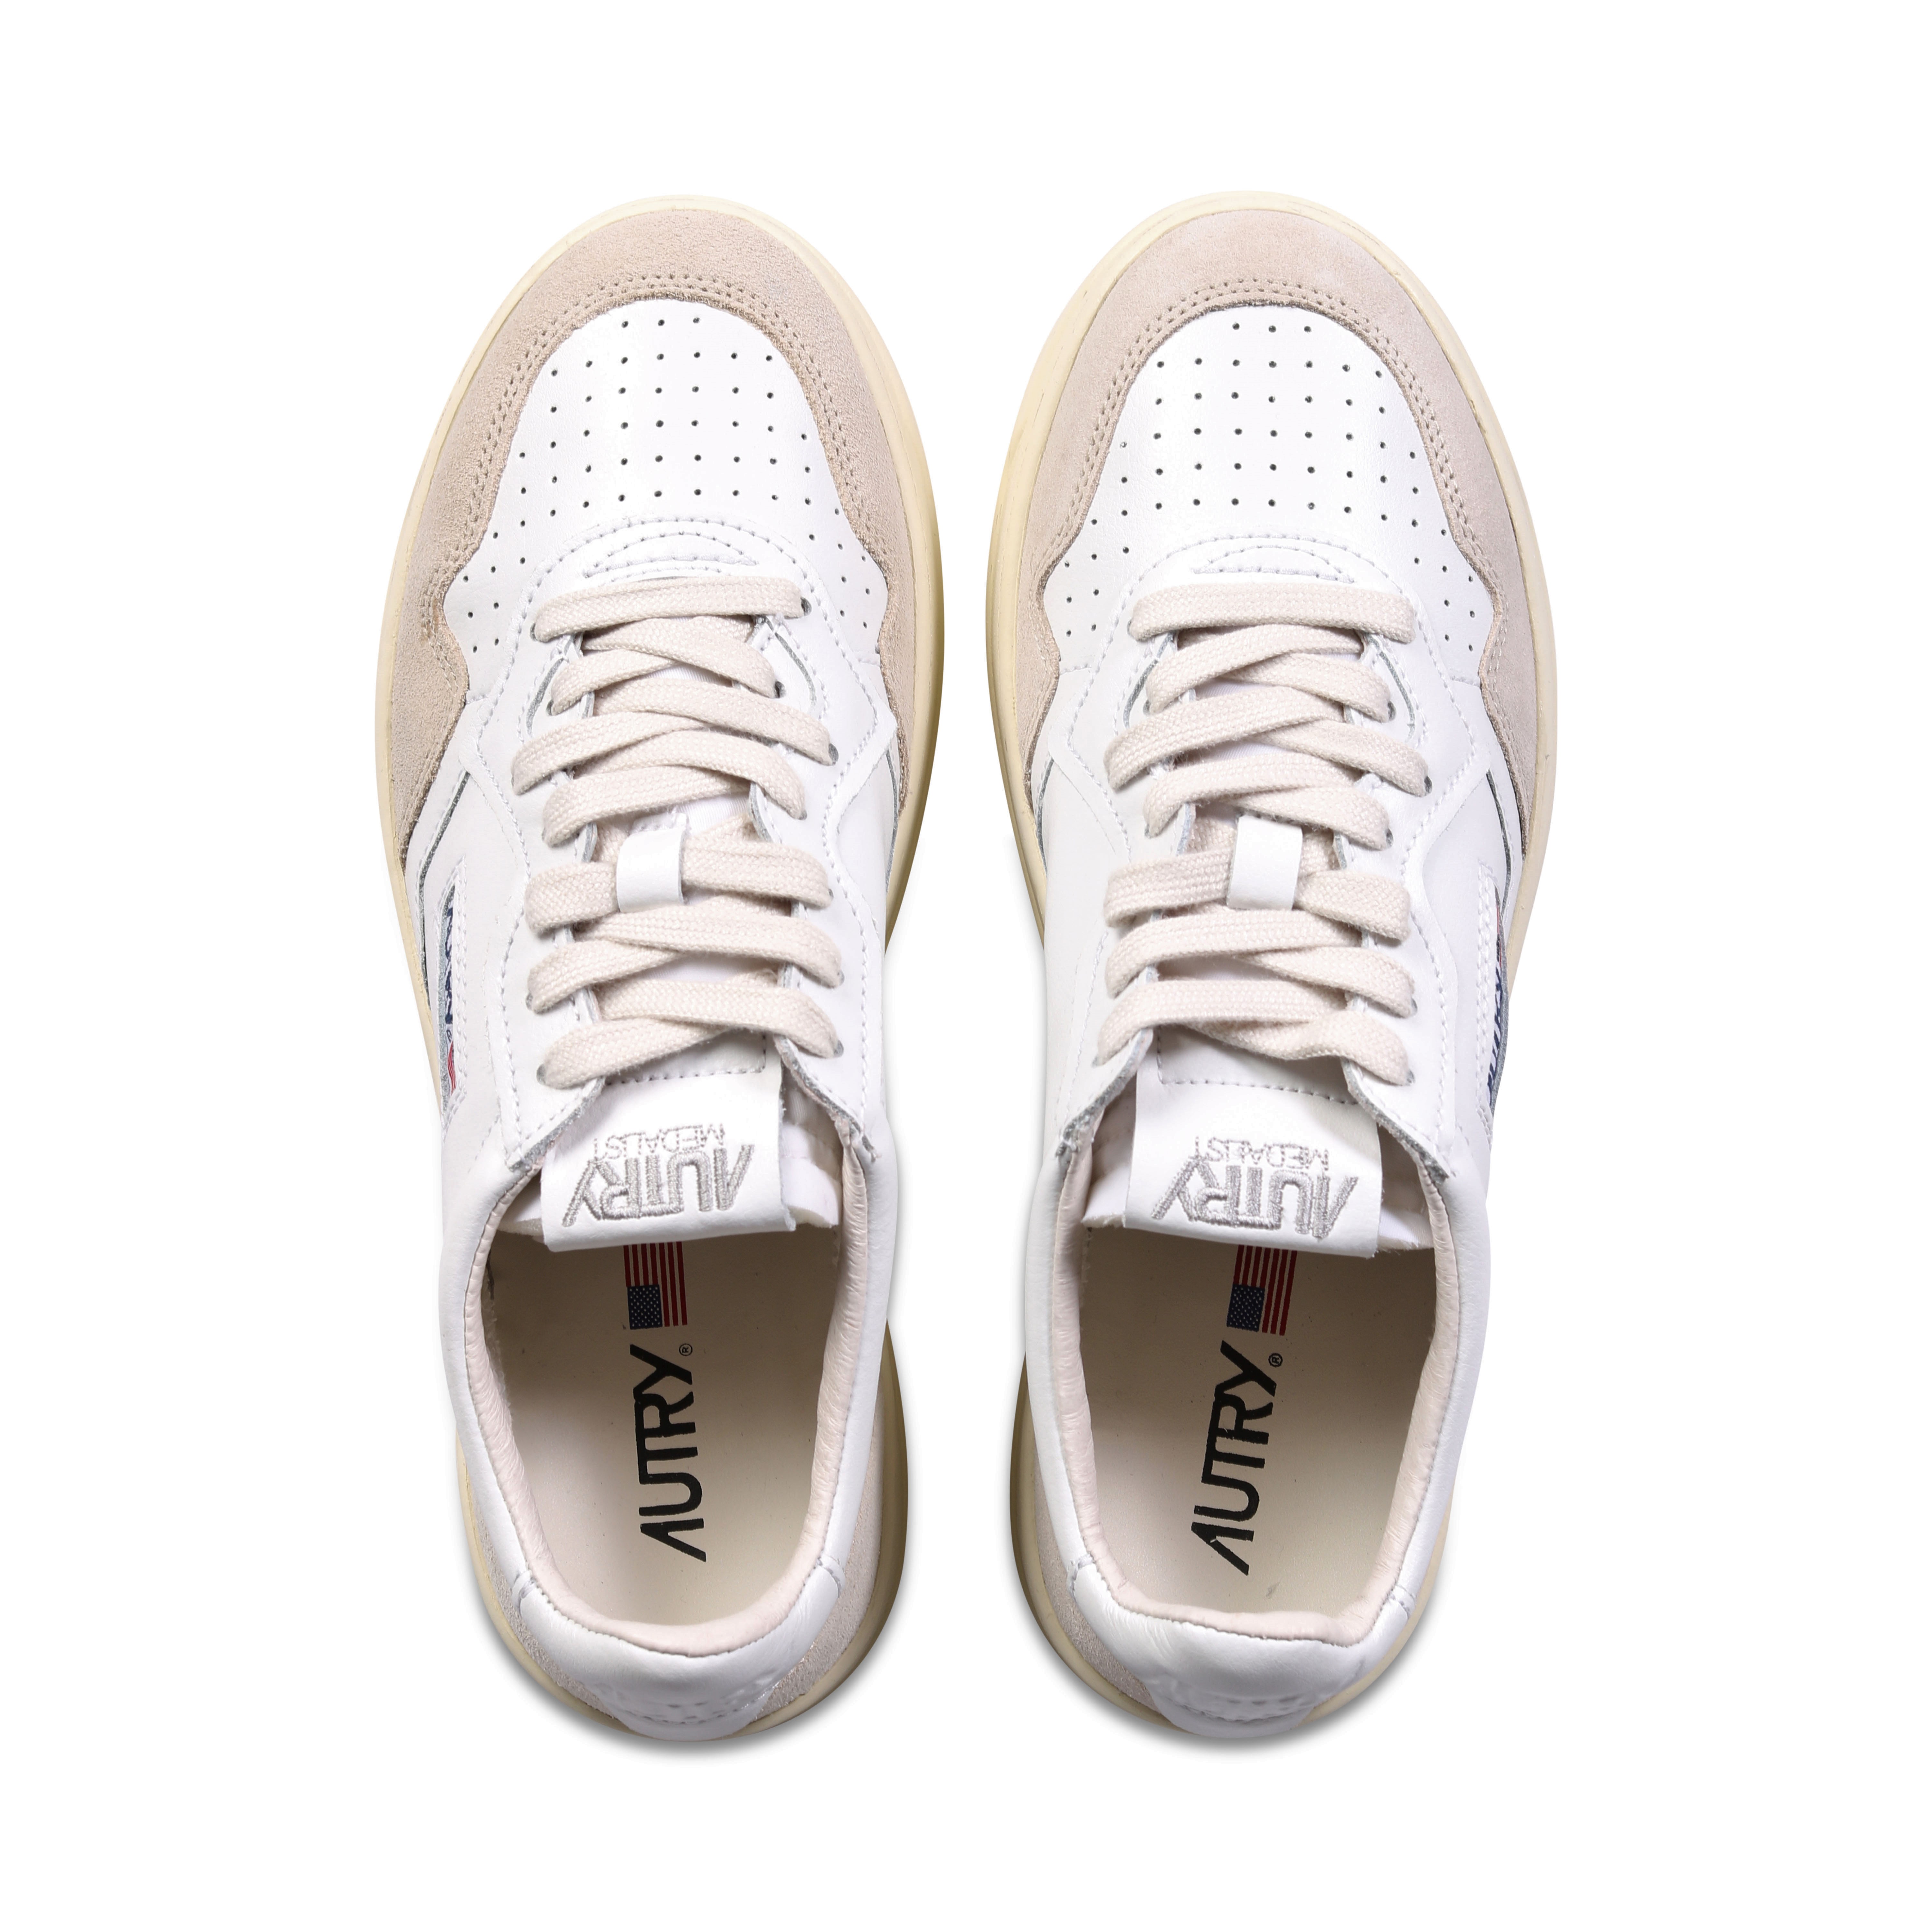 Autry Action Shoes Low Sneaker Suede White